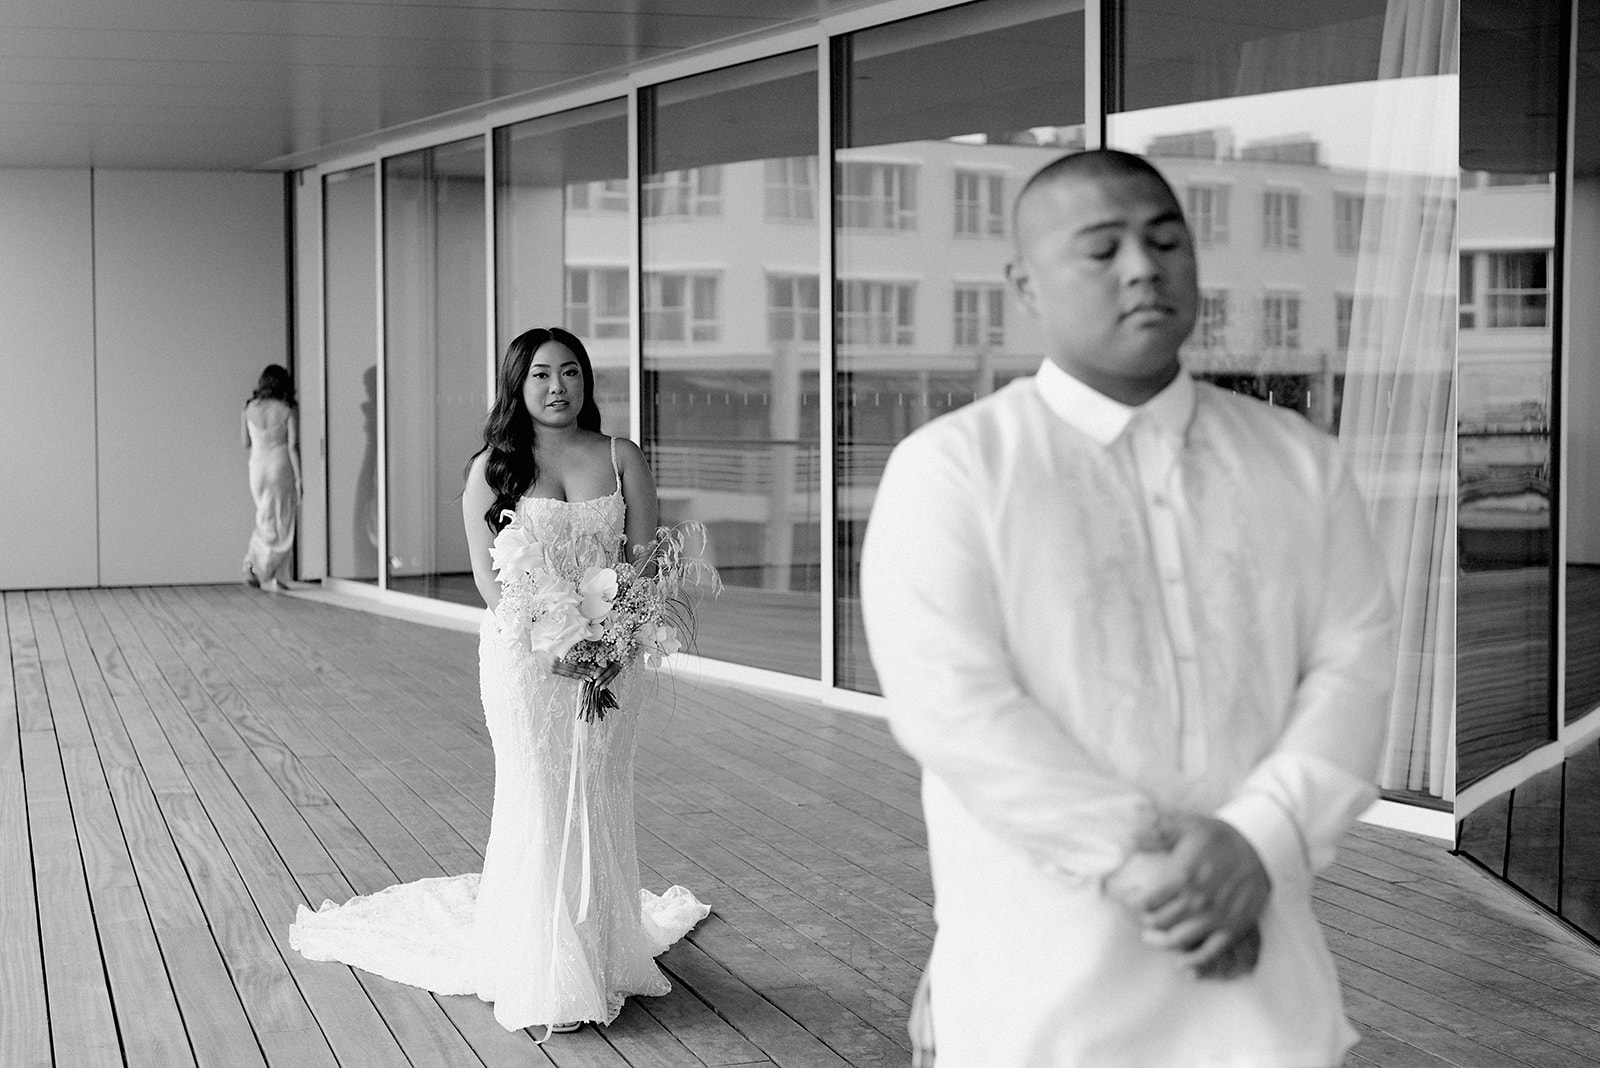 Vancouver wedding photographer captures photos of couple having their first look at Polygon Gallery